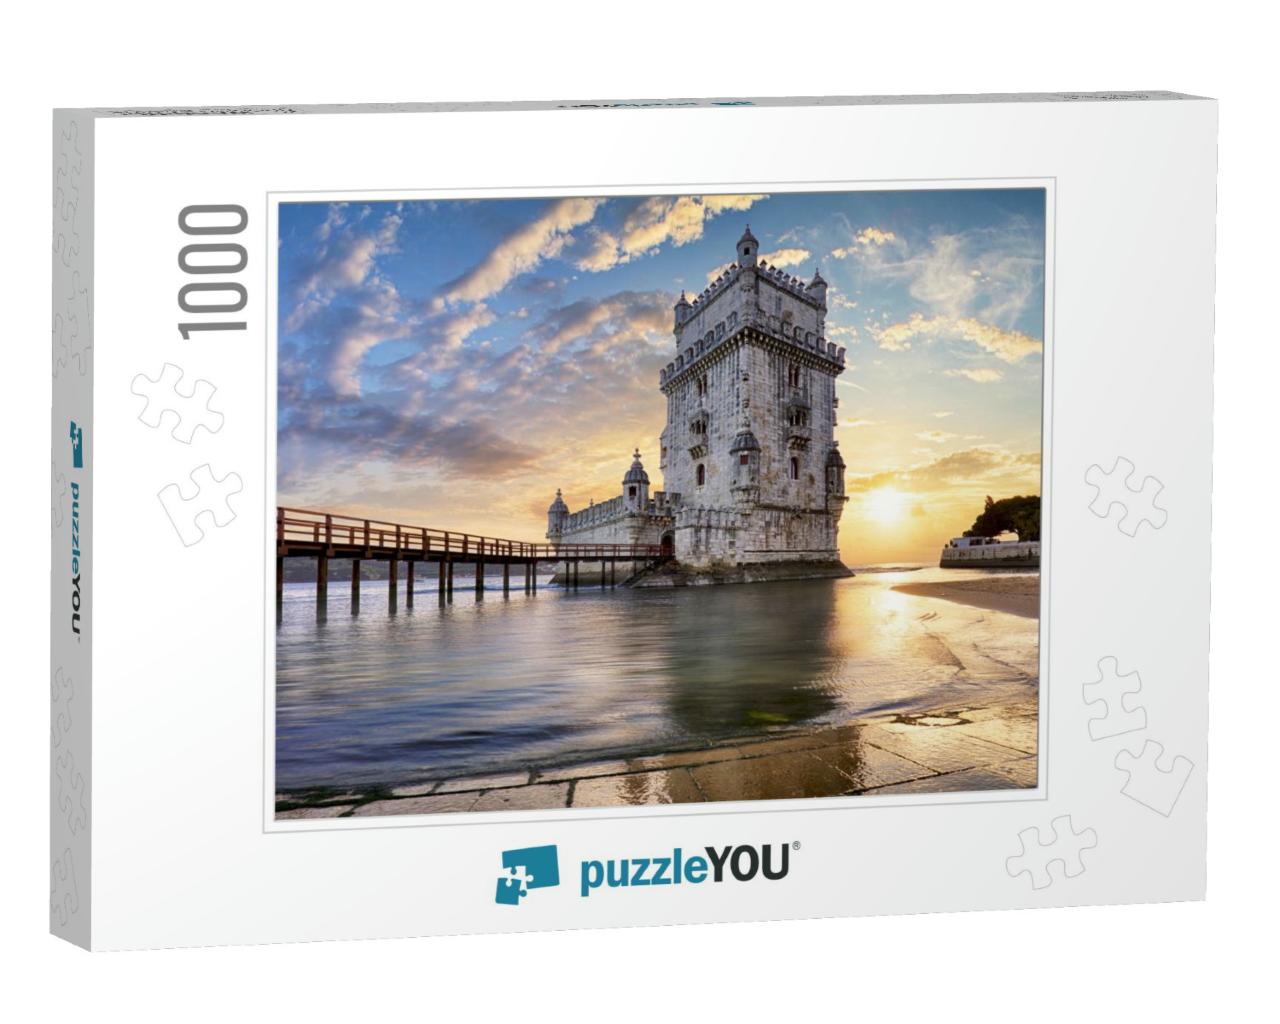 Lisbon, Belem Tower - Tagus River, Portugal... Jigsaw Puzzle with 1000 pieces